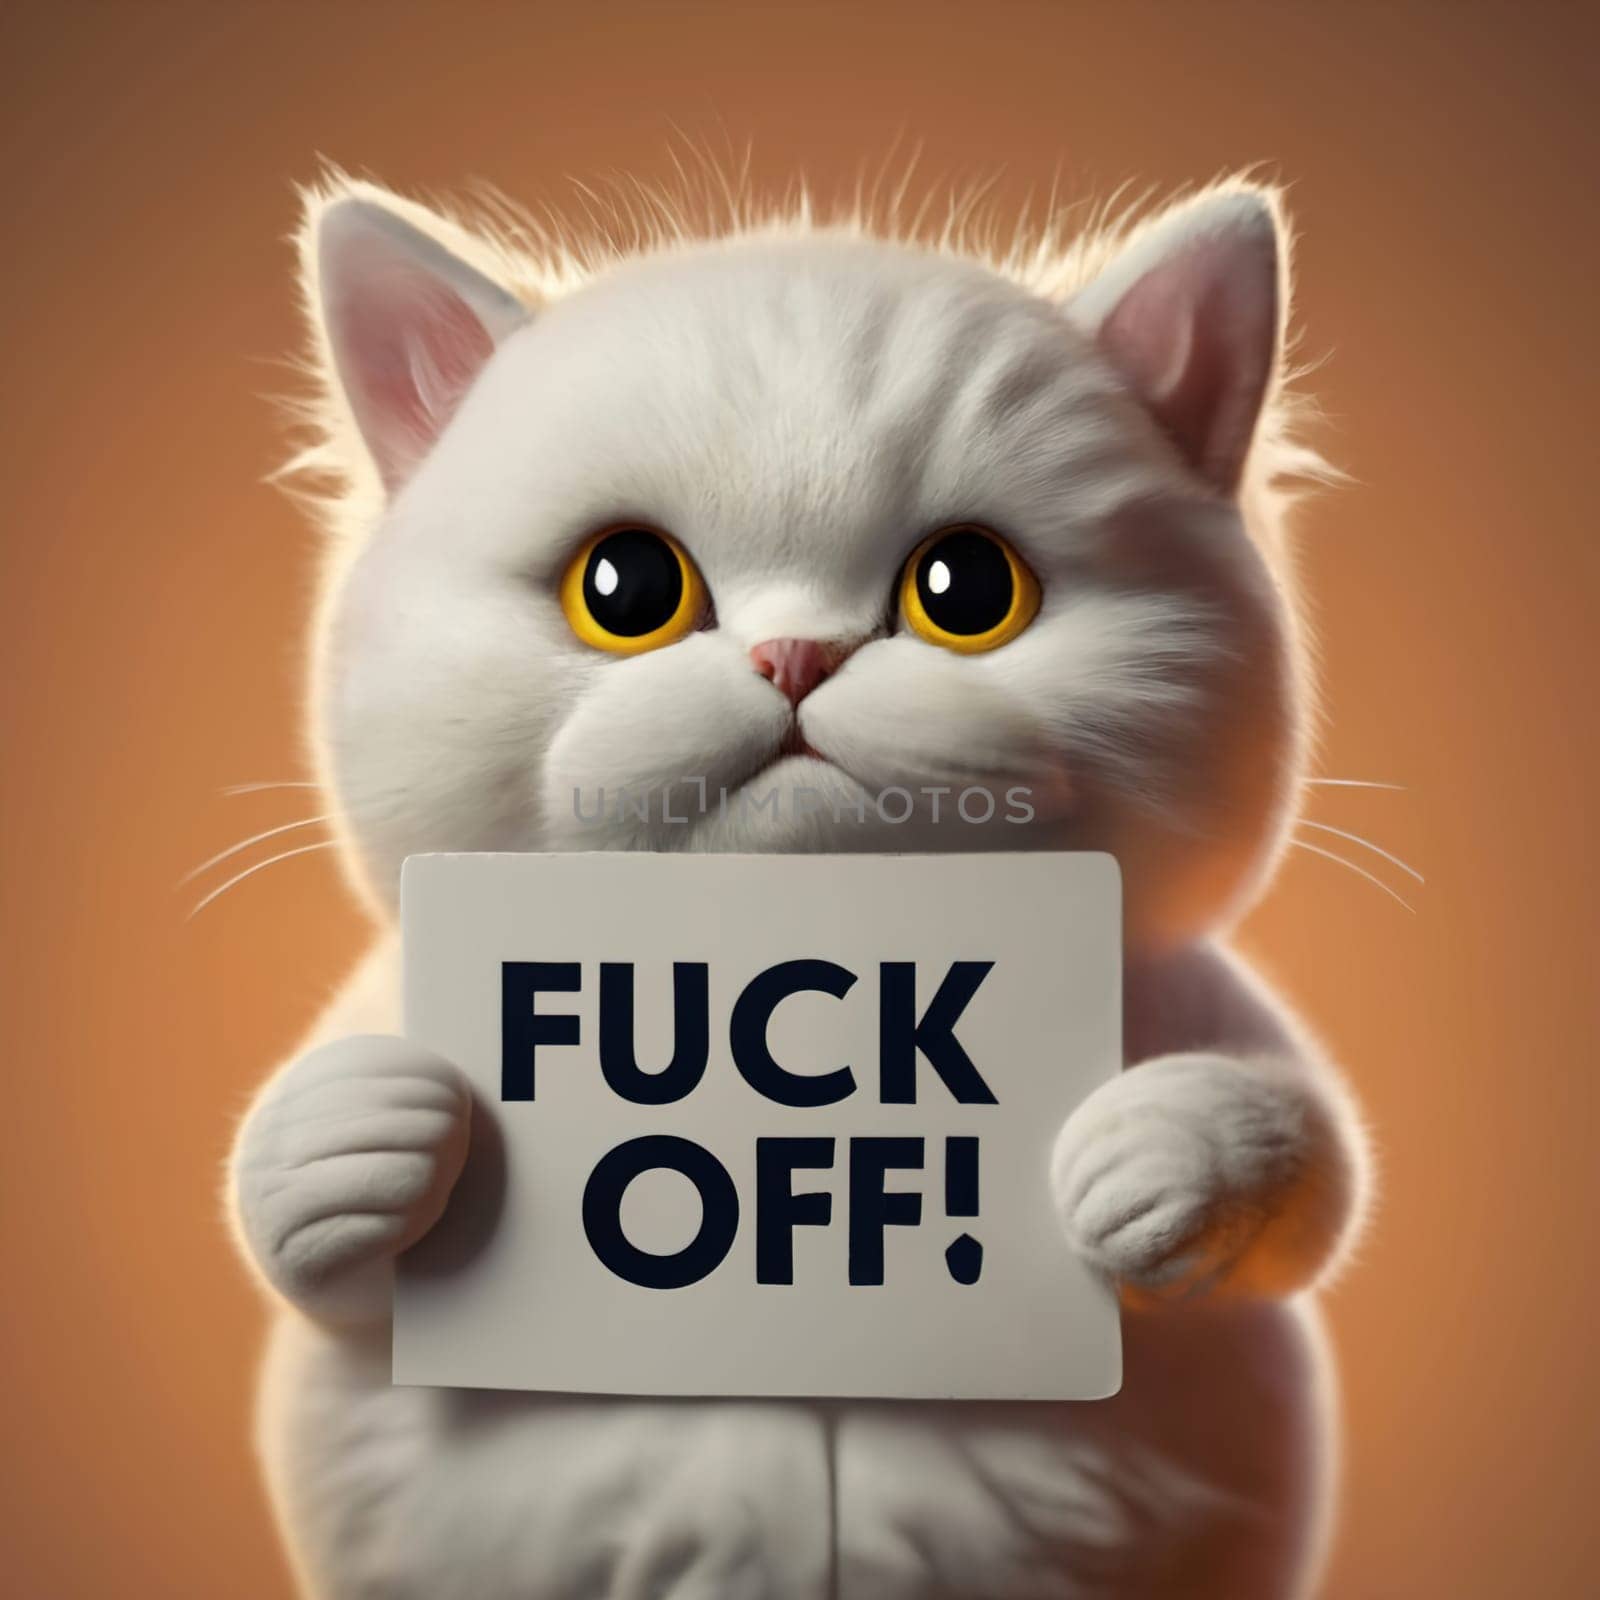 Realistic Cute White Cat in Emoji Style with Various Emotions - Holding a 'FUCK OFF' Sign by igor010